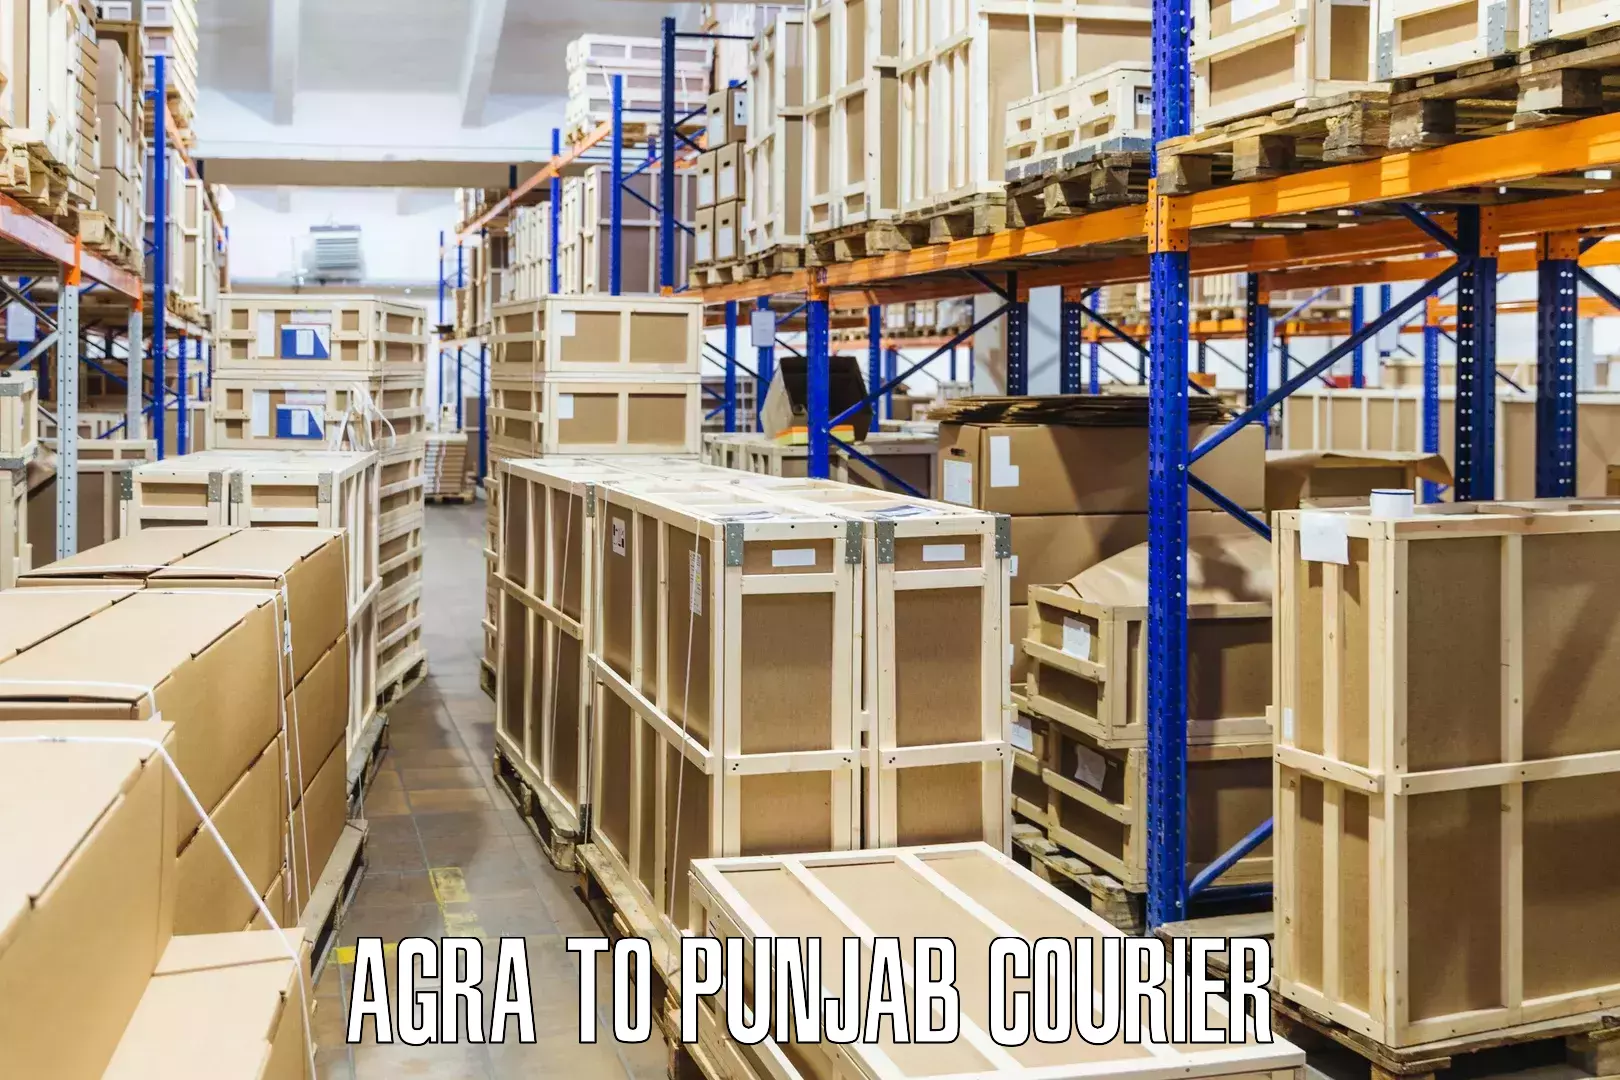 Comprehensive delivery network Agra to Sunam